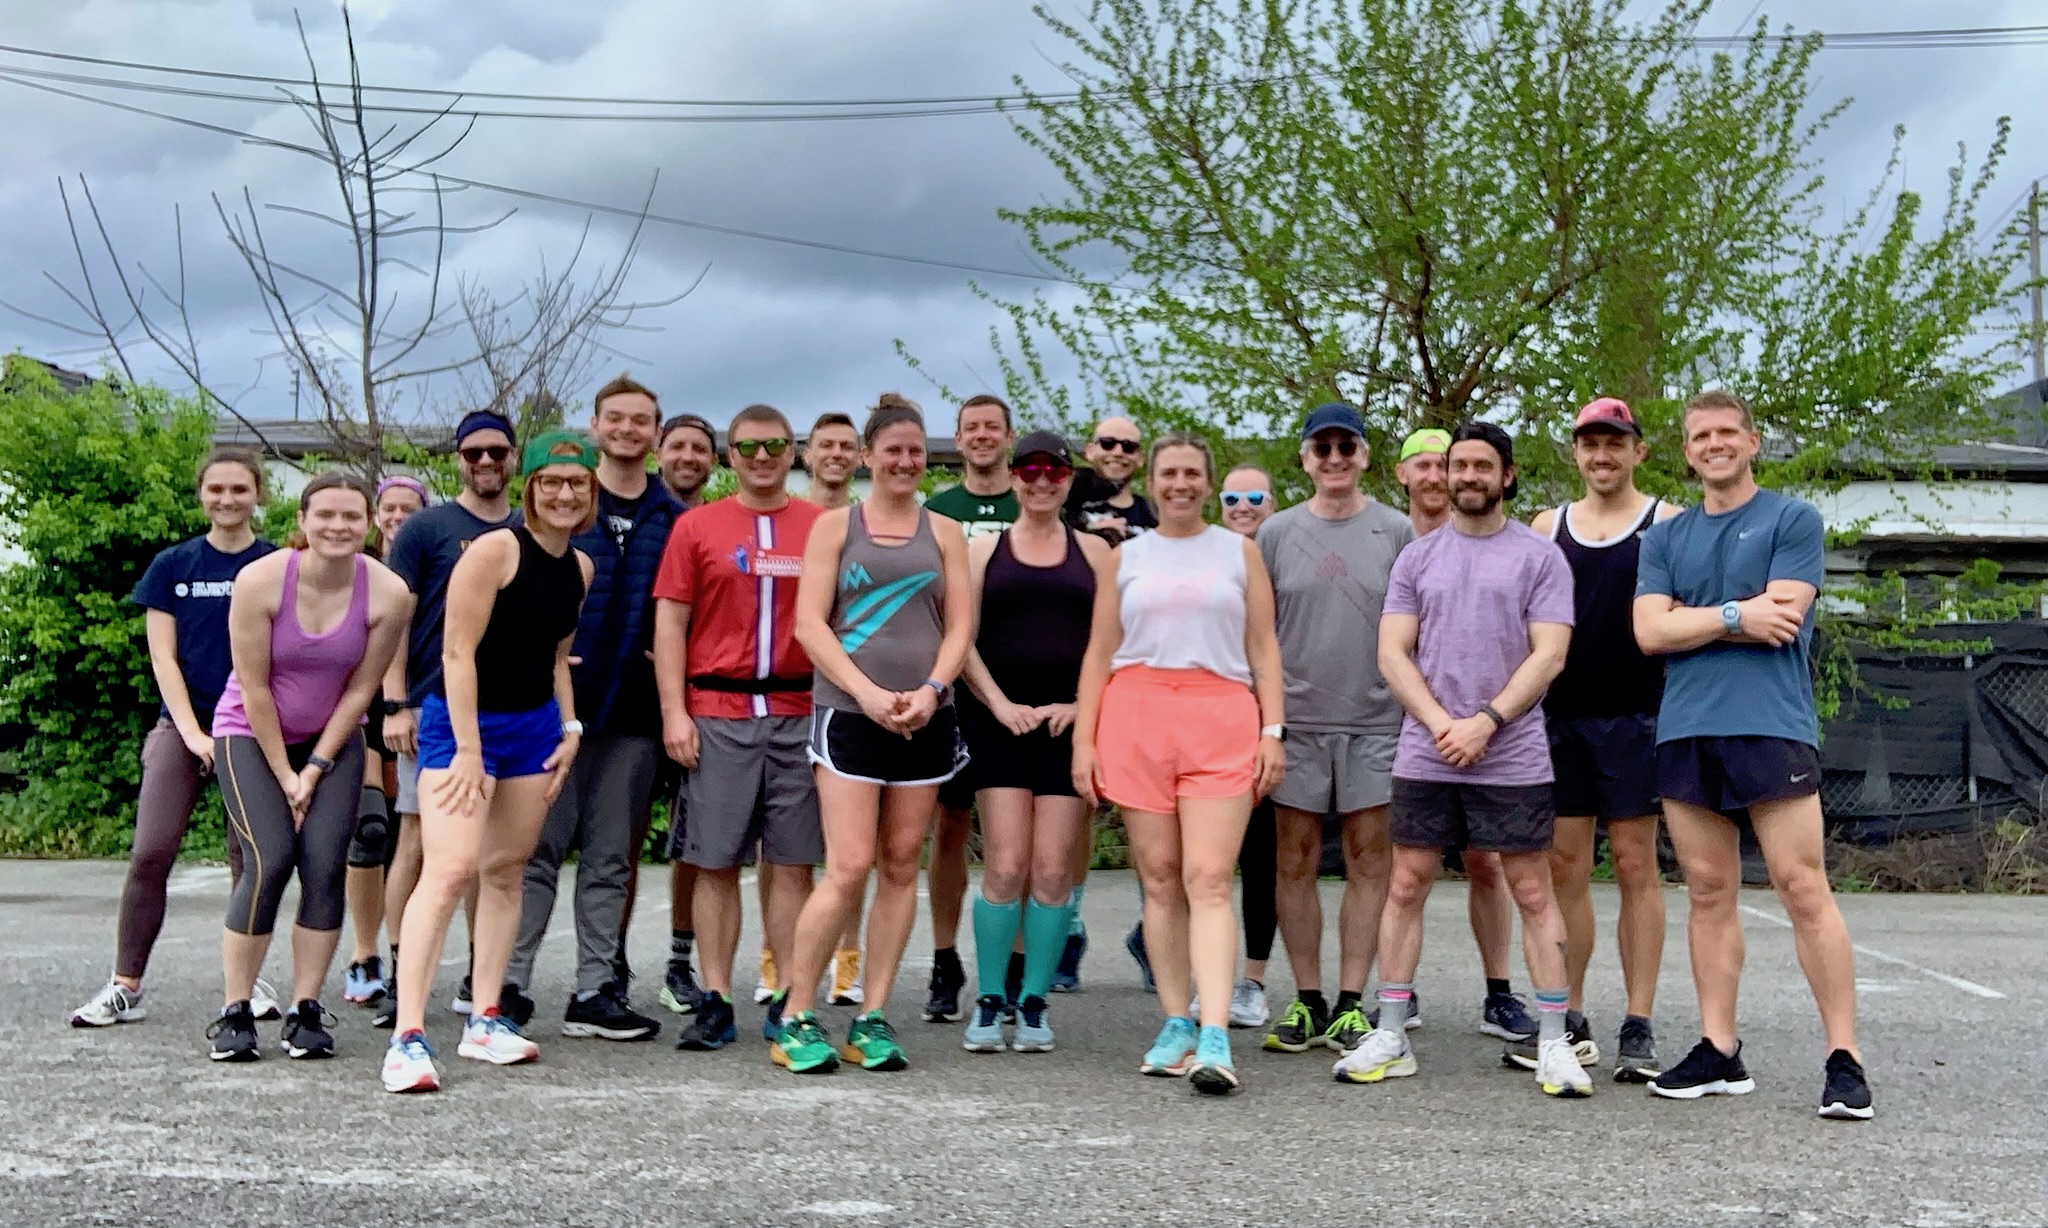 Group photo of New Shoe Day members on a run